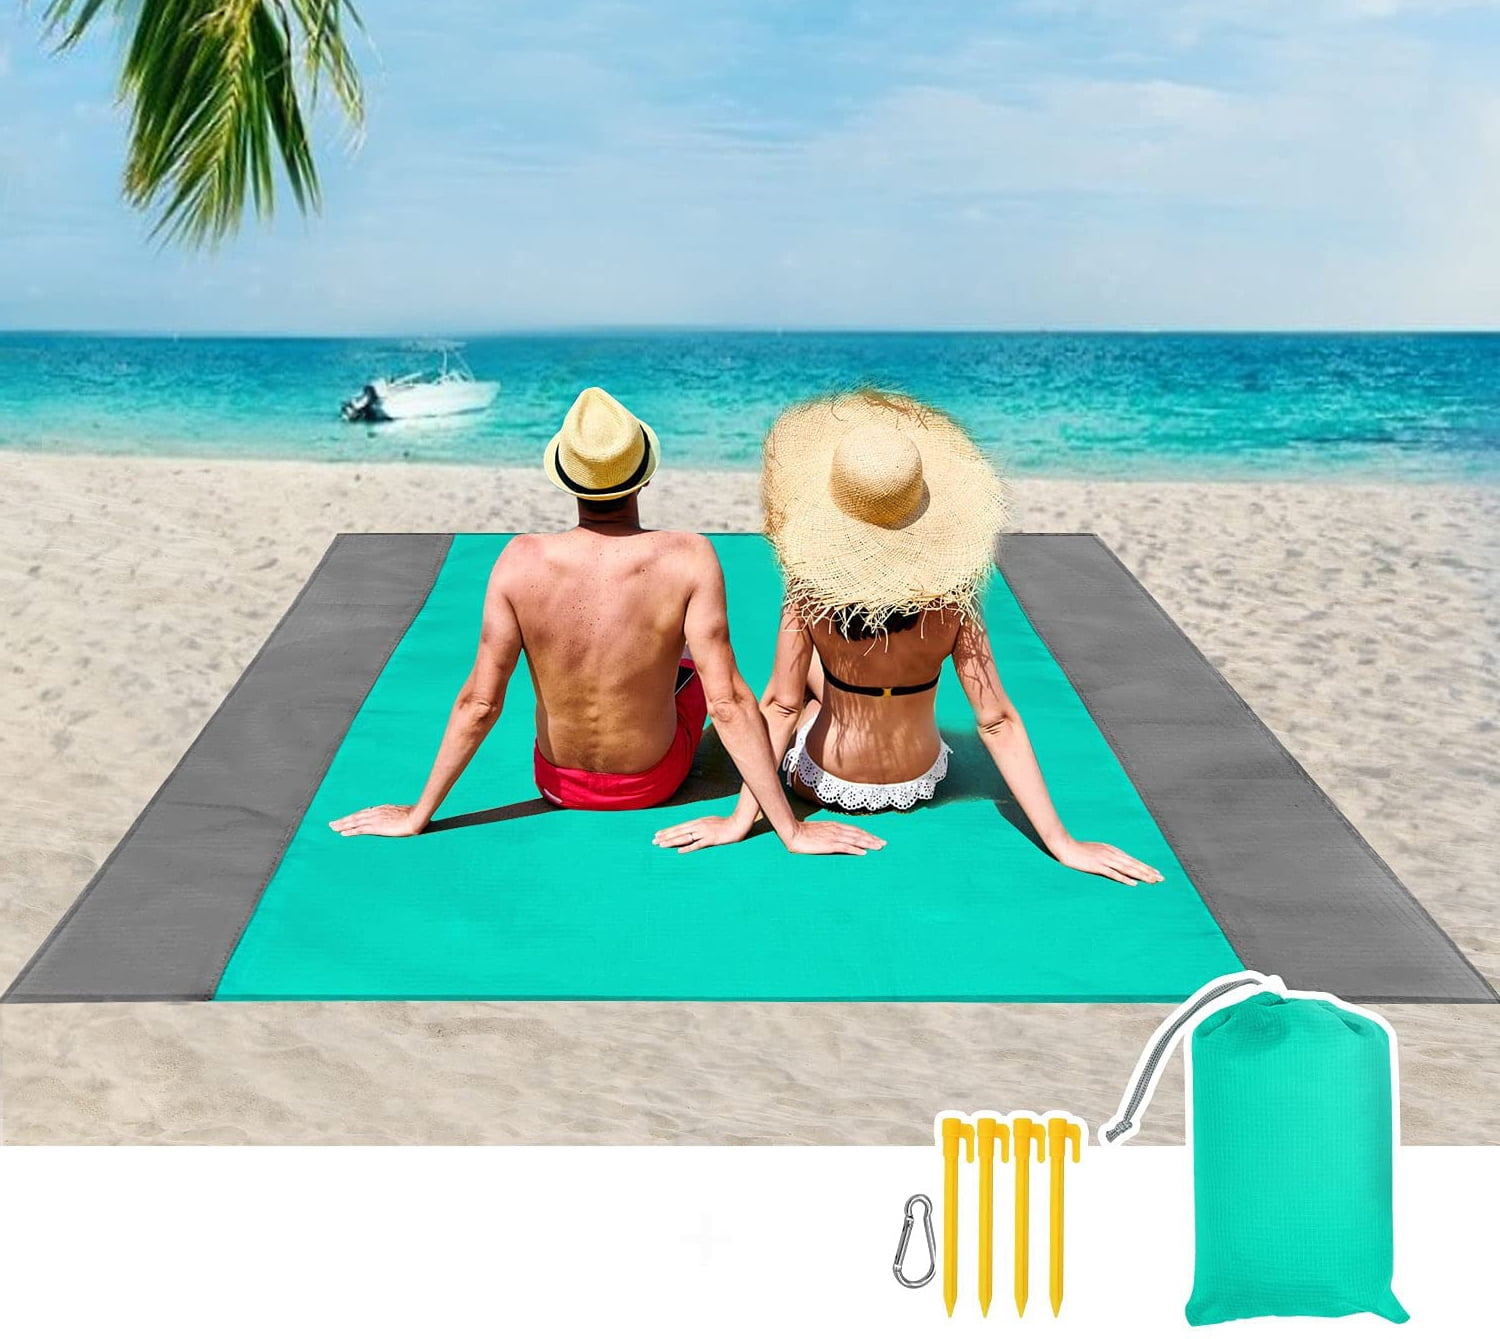 Details about   waterproof Beach mat blanket Outdoor Portable Picnic Camping Sand Free 